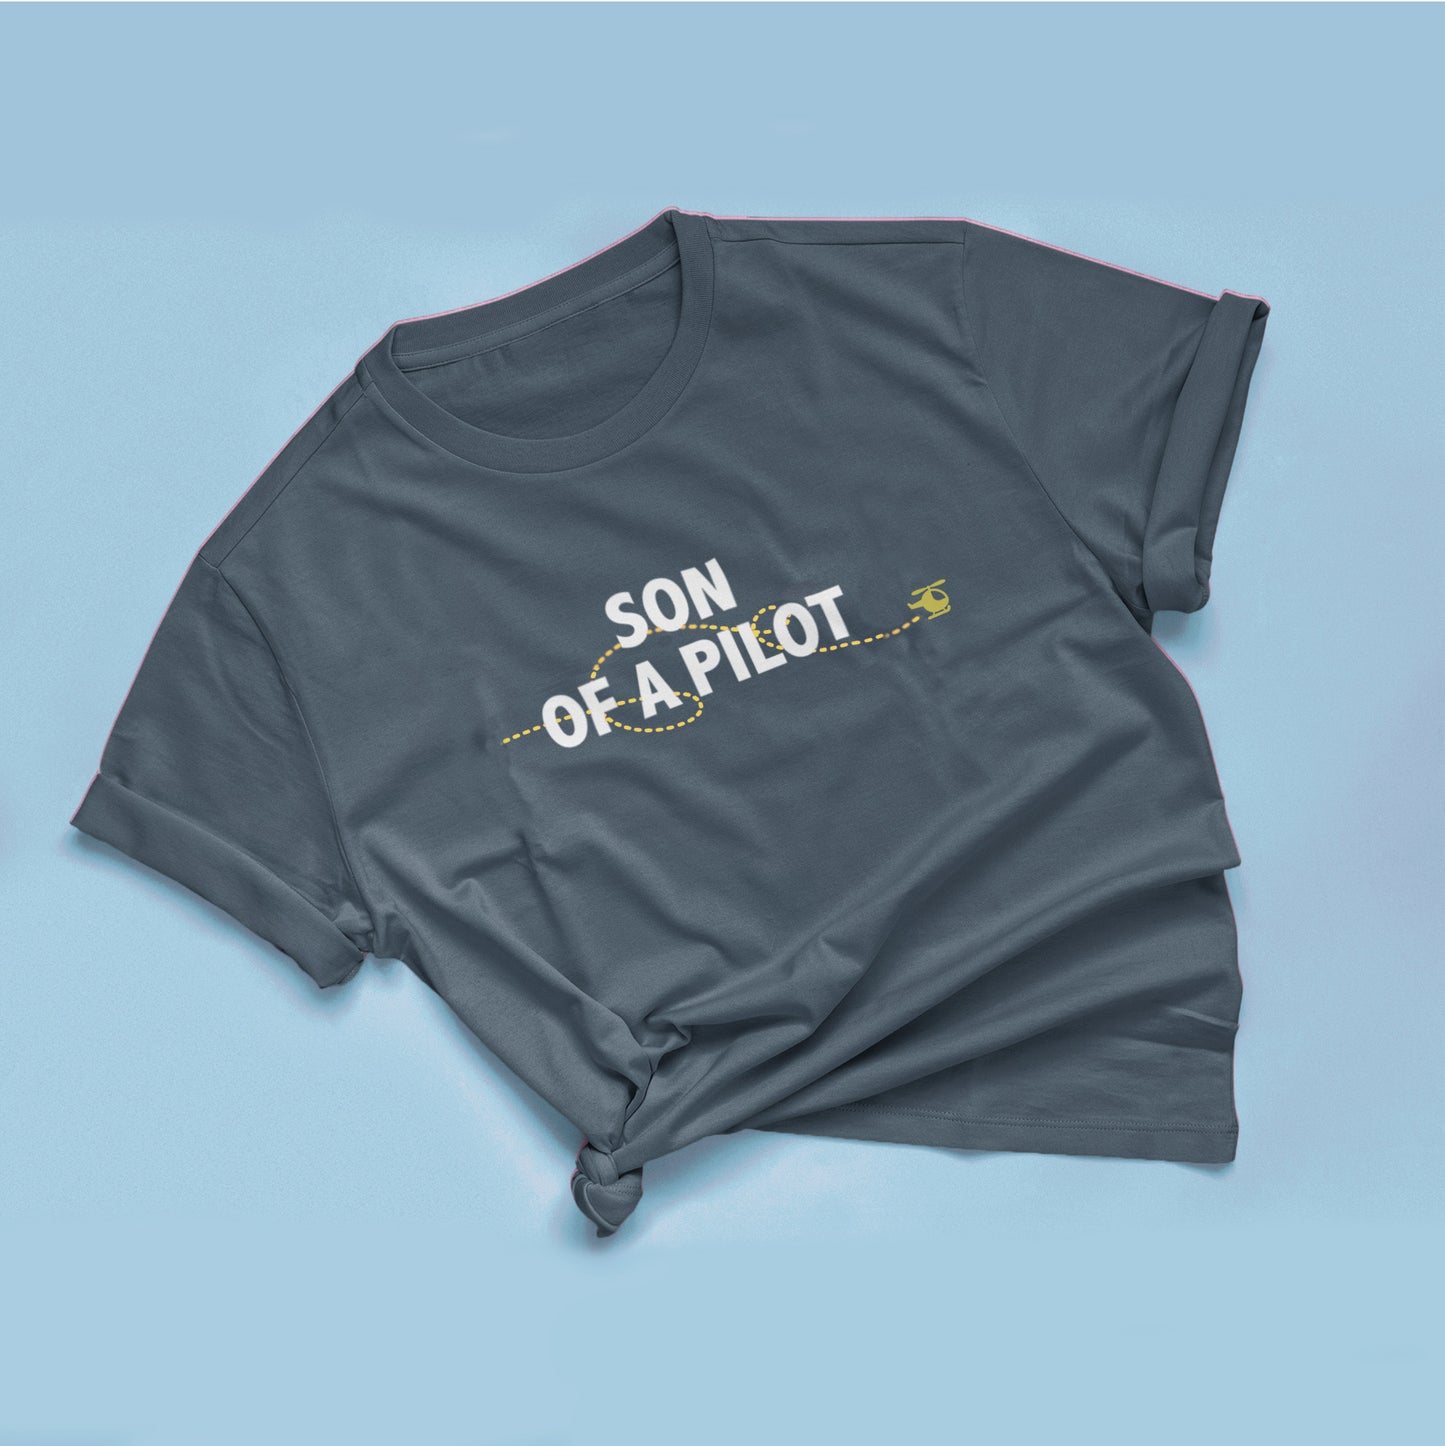 Son of the/a Pilot - Baby & Toddler T-shirts